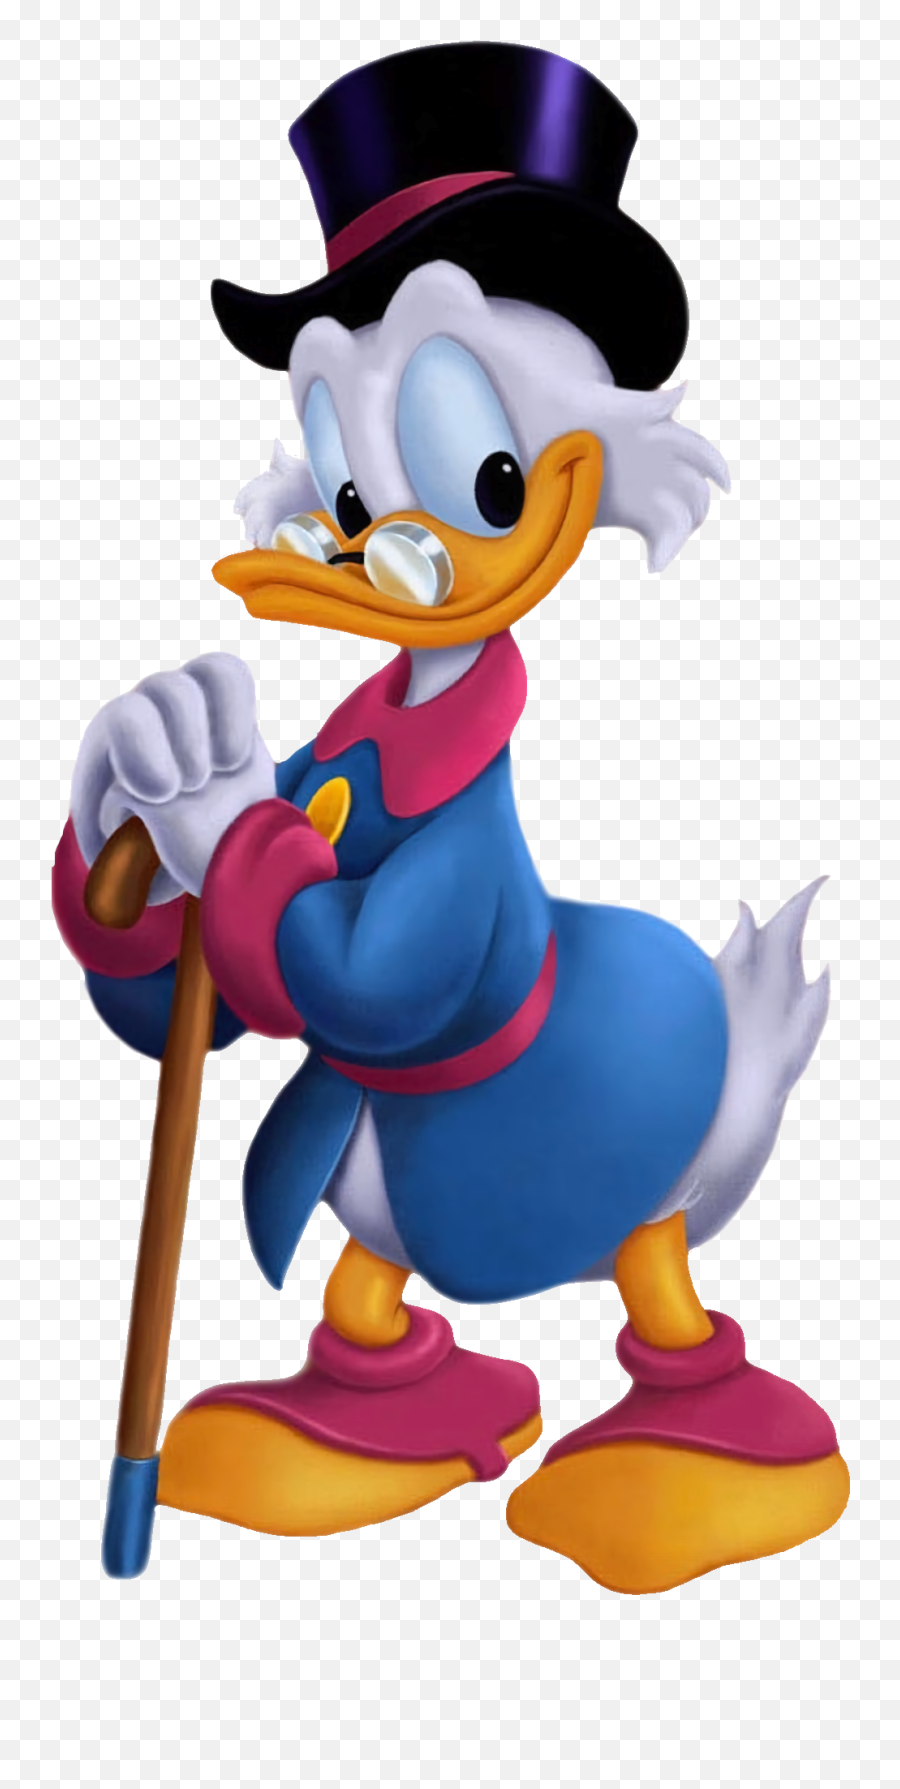 Scrooge Mcduck Composite Png Icon